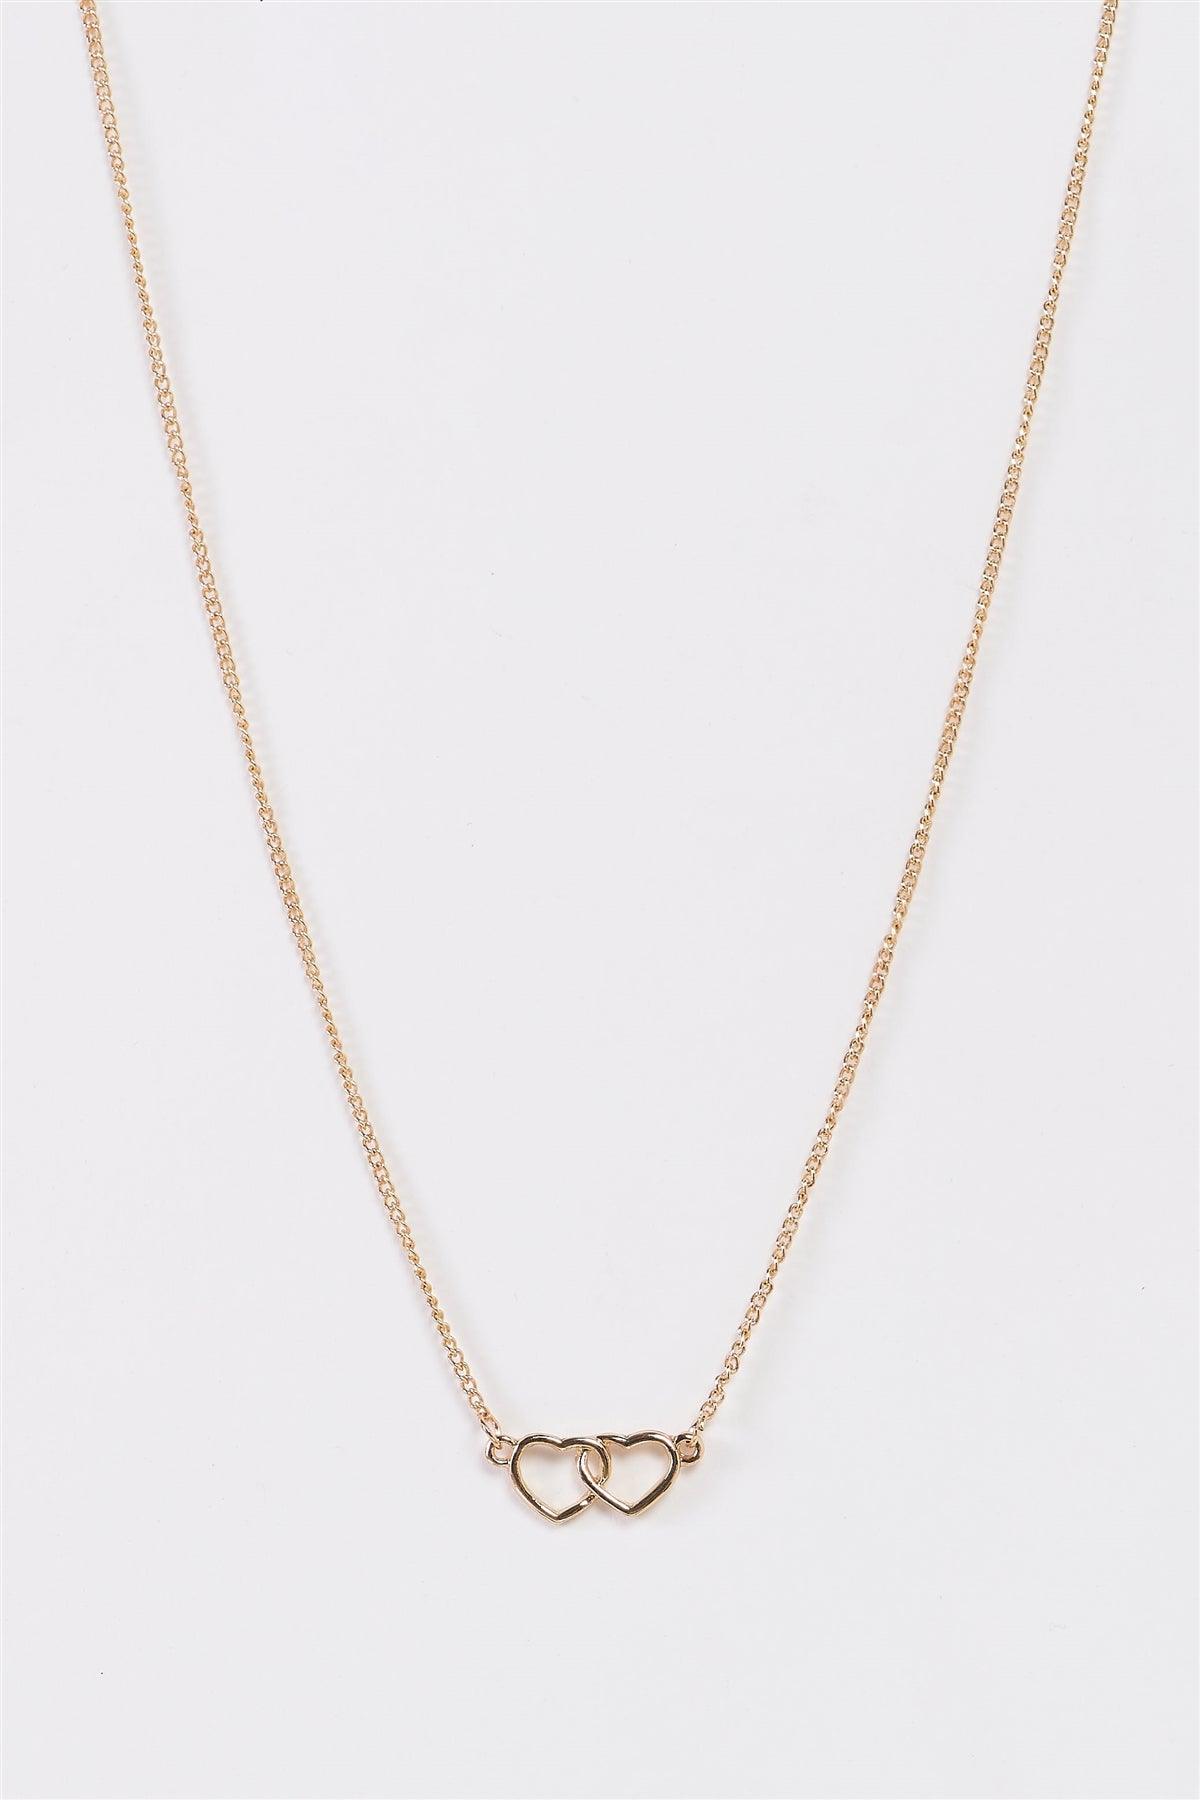 Heart To Heart Gold Delicate Interlocked Hearts Charm Necklace /3 Pieces